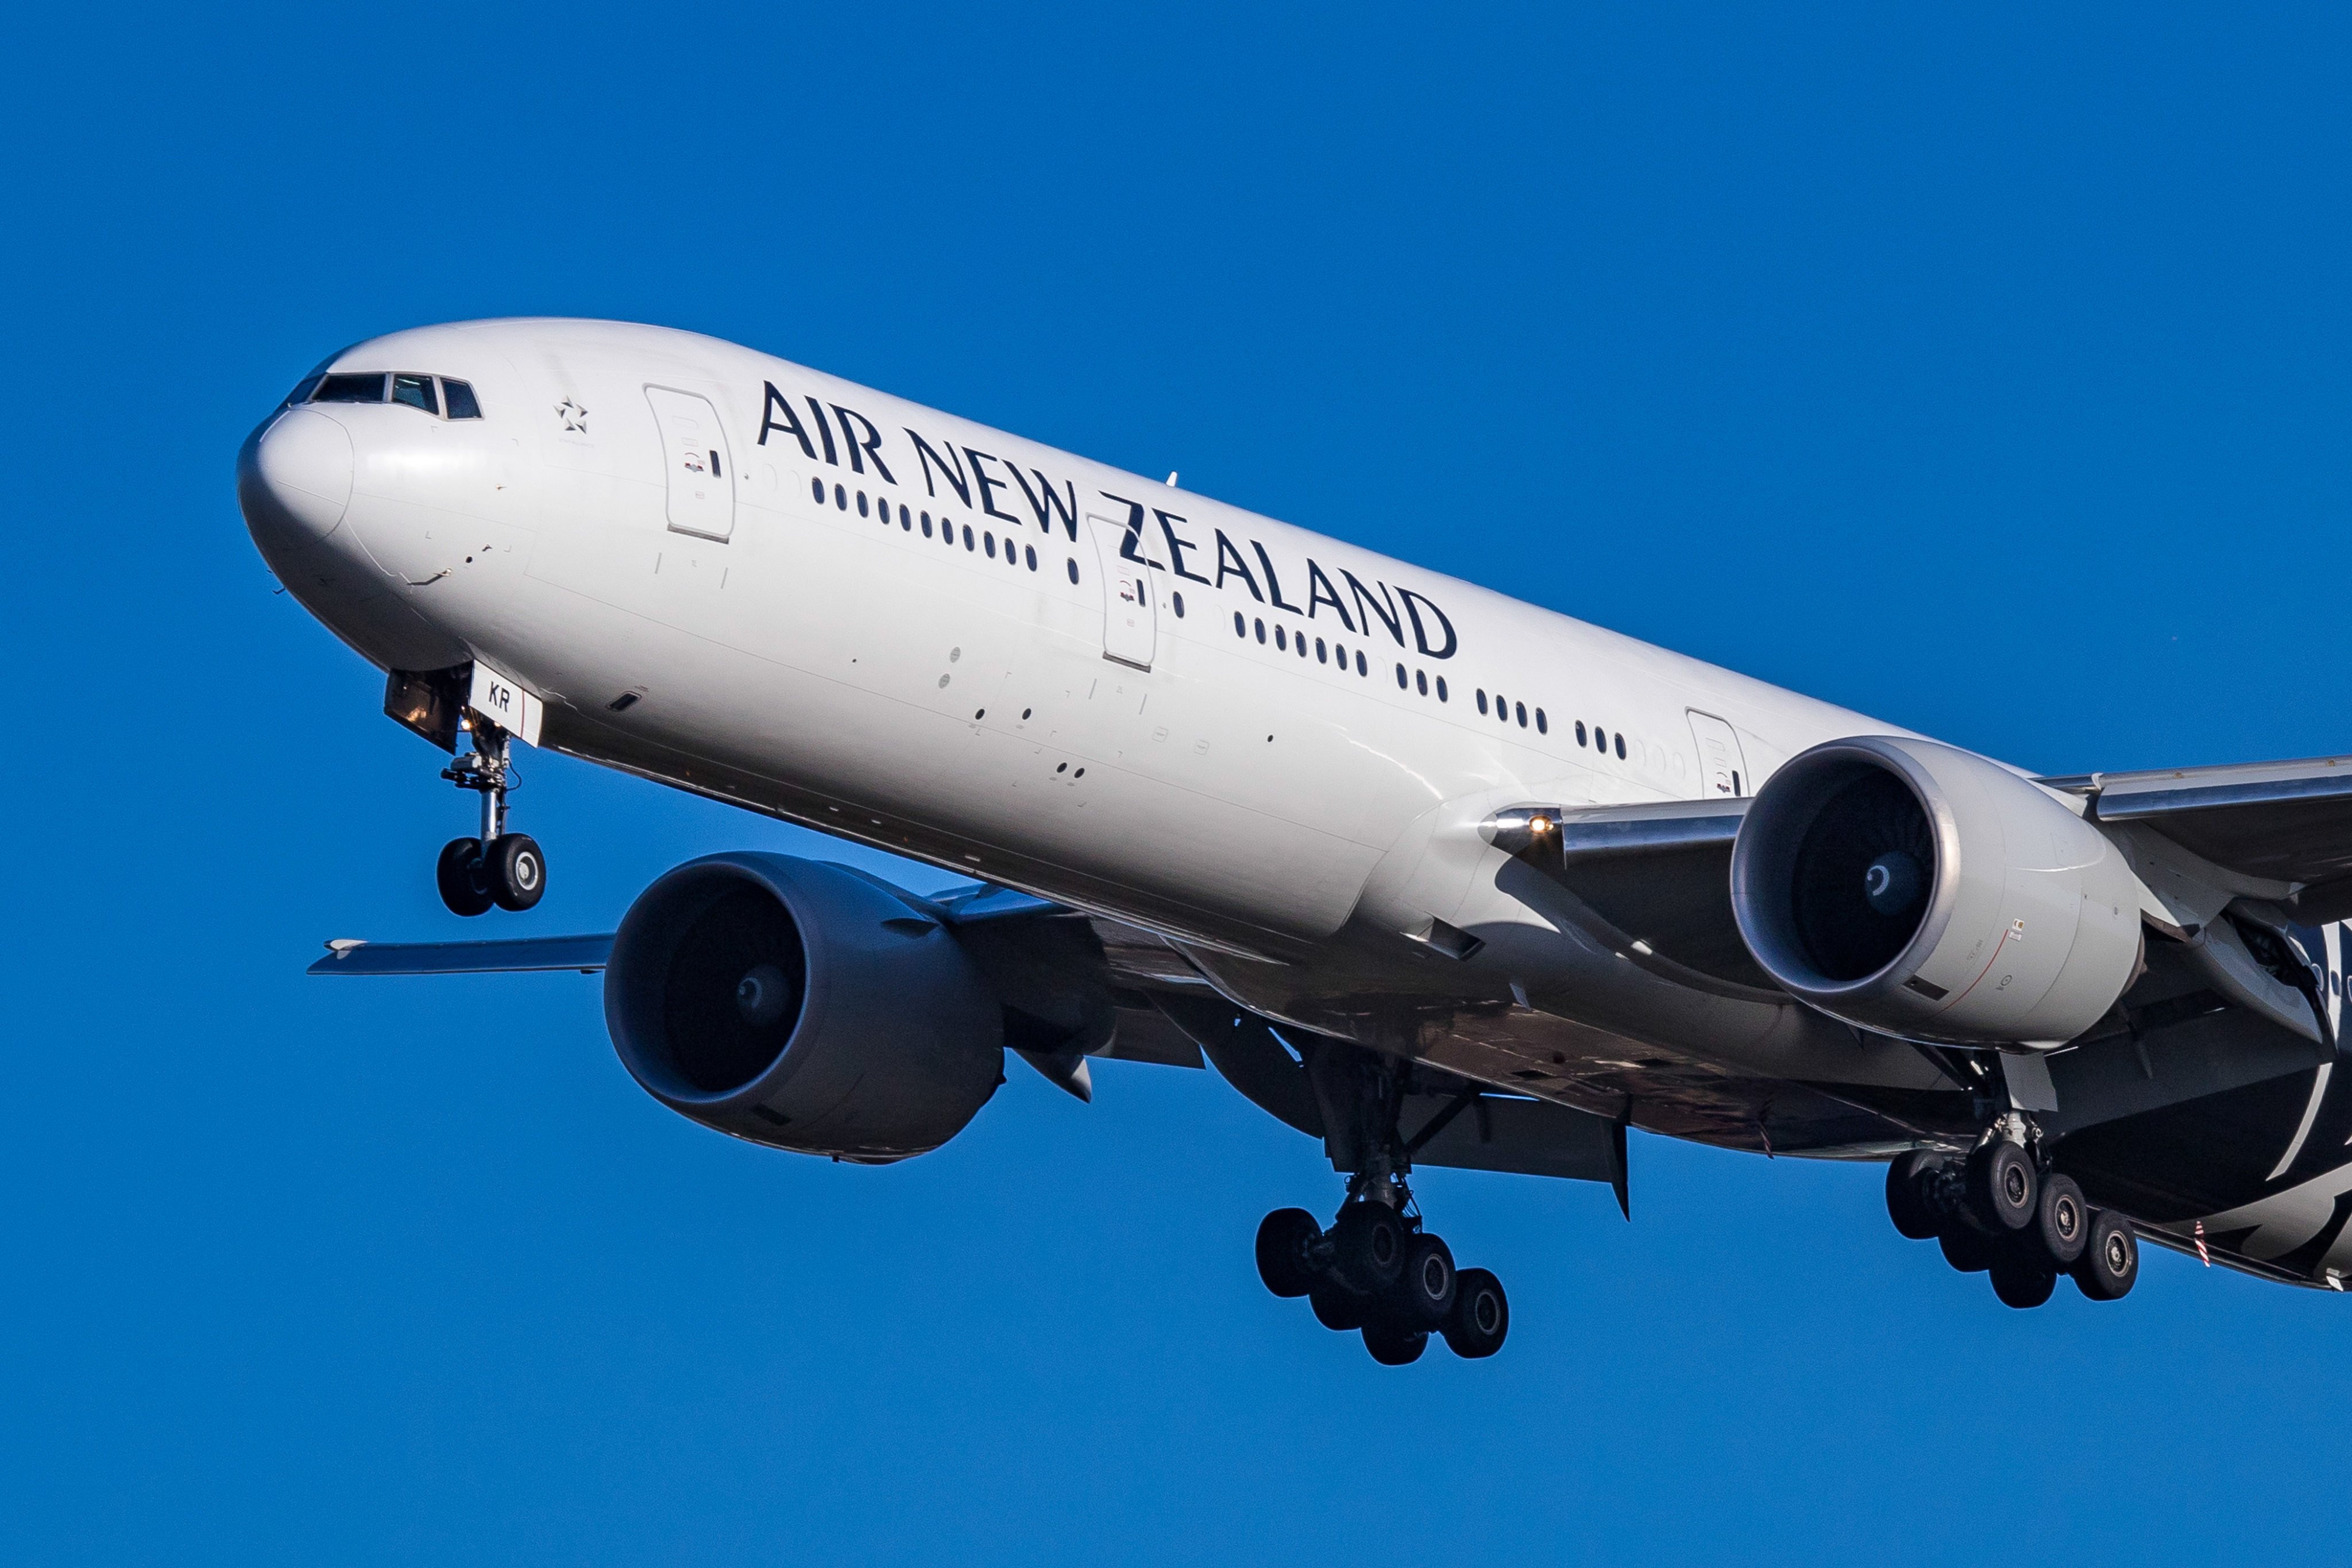 A commercial Air New Zealand flight comes in to land. Photo: NurPhoto via Getty Images